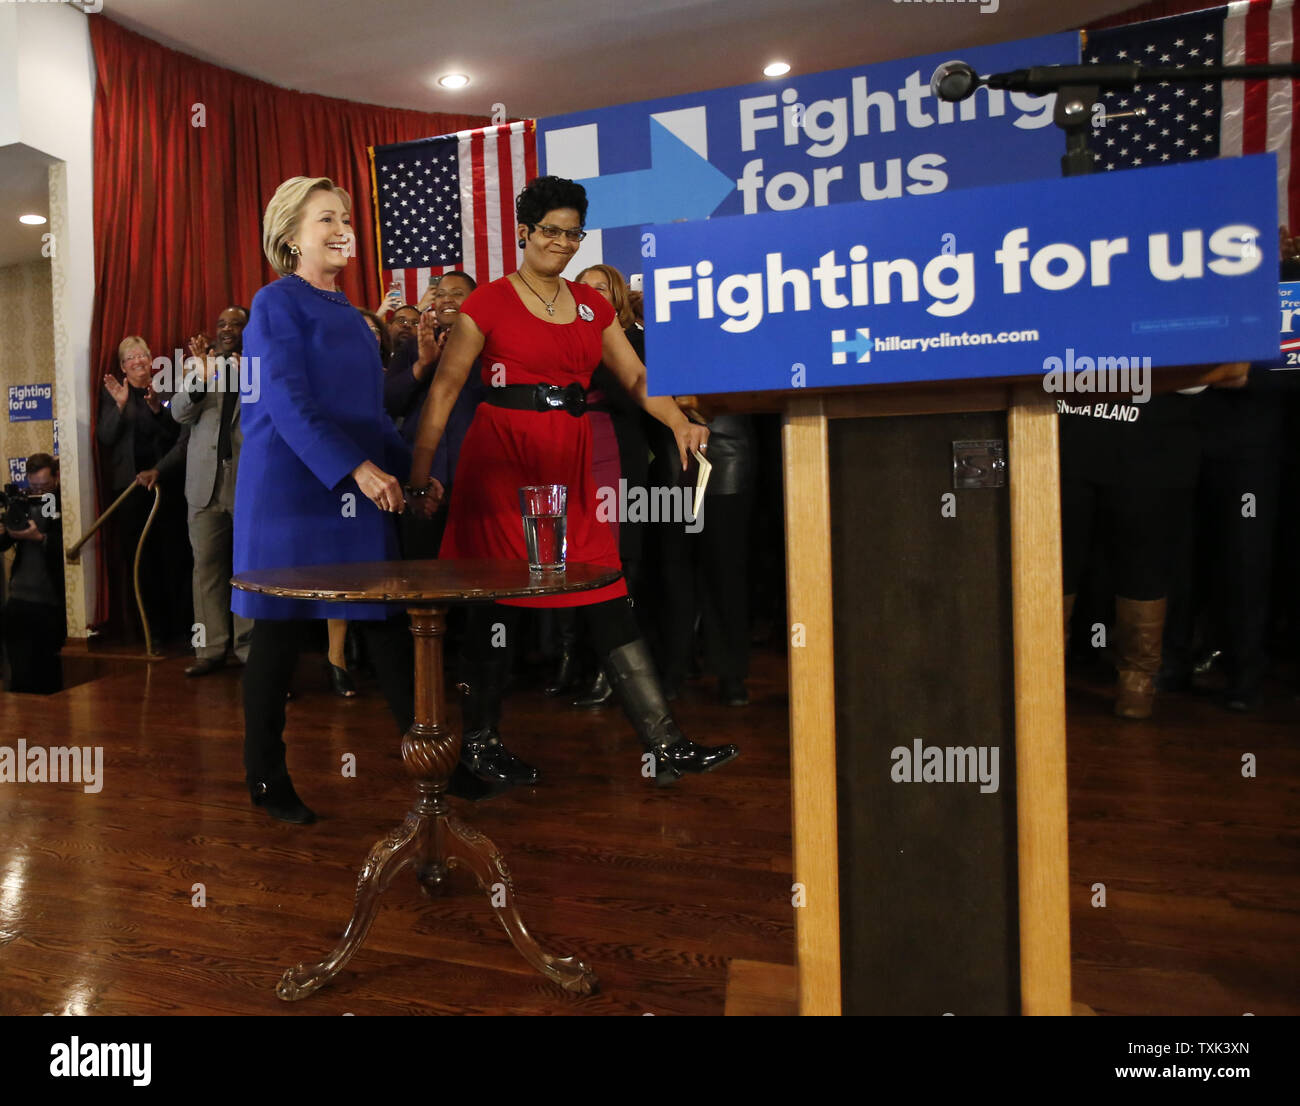 Democratic Presidential hopeful Hillary Clinton, left, arrives with Geneva Reed-Veal, right, the mother of Sandra Bland, who was found dead in a Texas jail cell, before speaking to supporters at a 'Get Out the Vote' organizing event at the Parkway Ballroom in Chicago on February 17, 2016. Clinton's appearance in Chicago's Bronzeville neighborhood, a historic African American community, is part of a major effort of her campaign to reach out to black voters. Photo by Kamil Krzaczynski/UPI Stock Photo